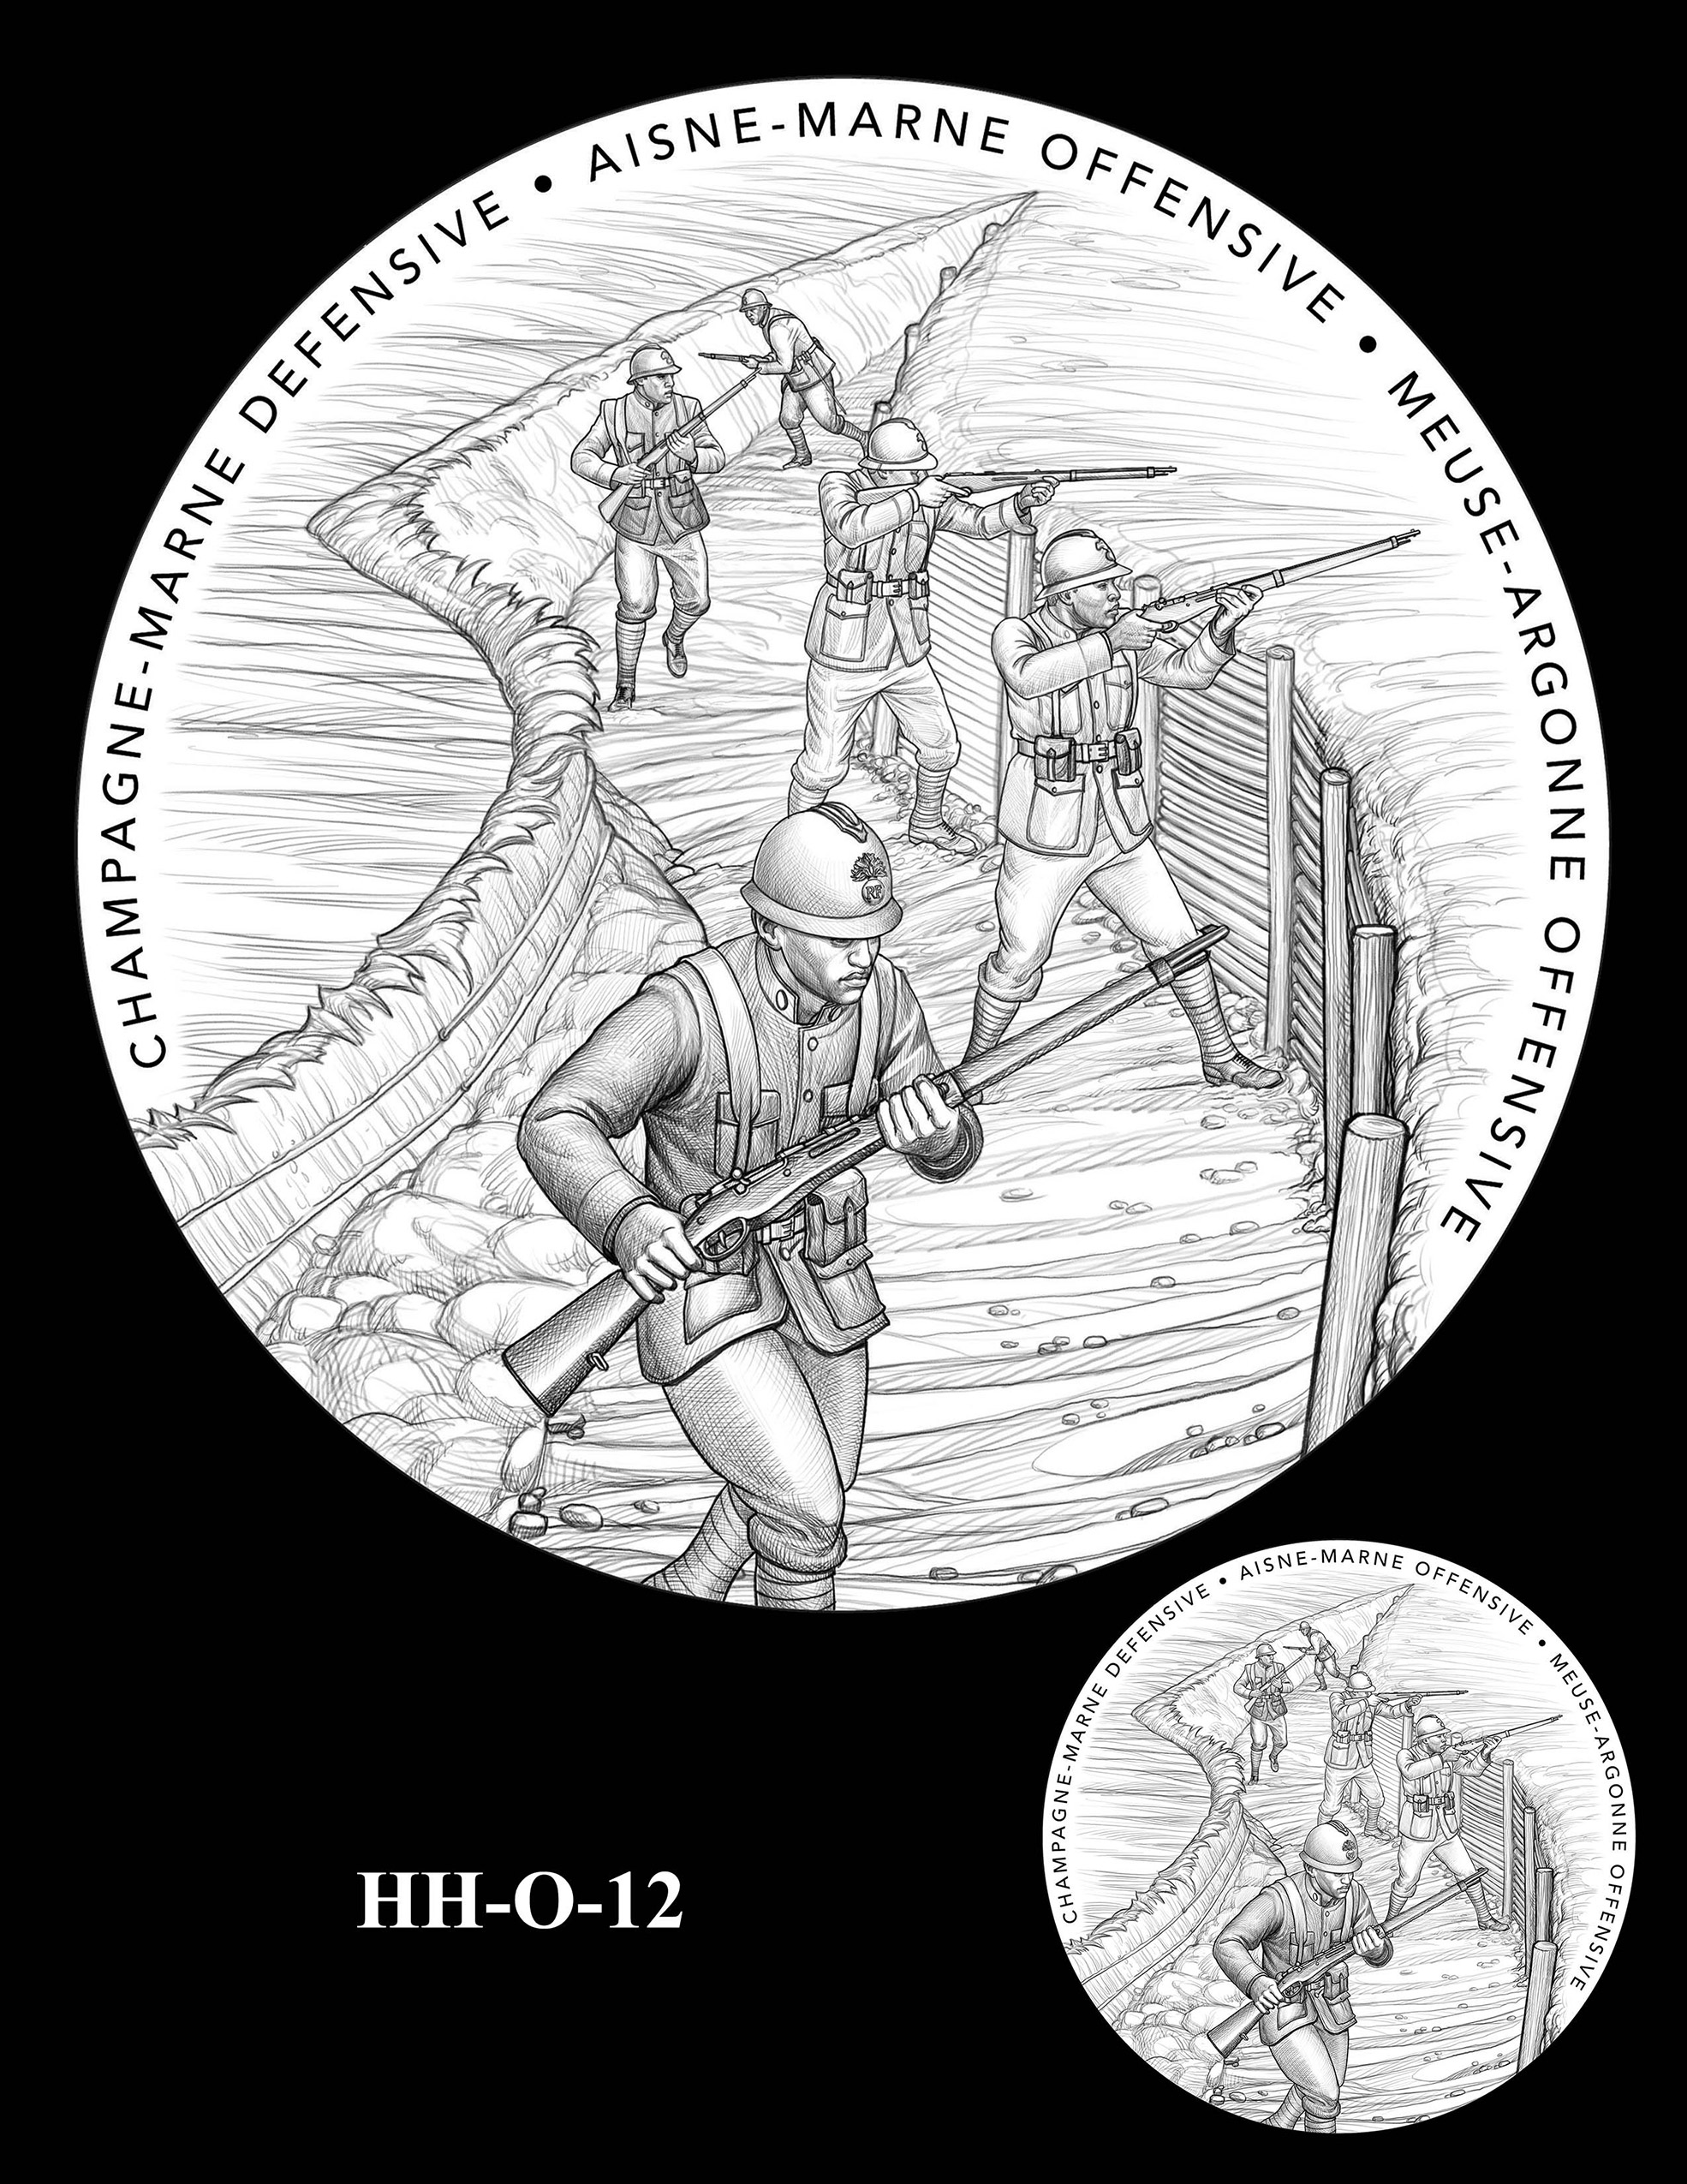 HH-O-12 -- Harlem Hellfighters Congressional Gold Medal